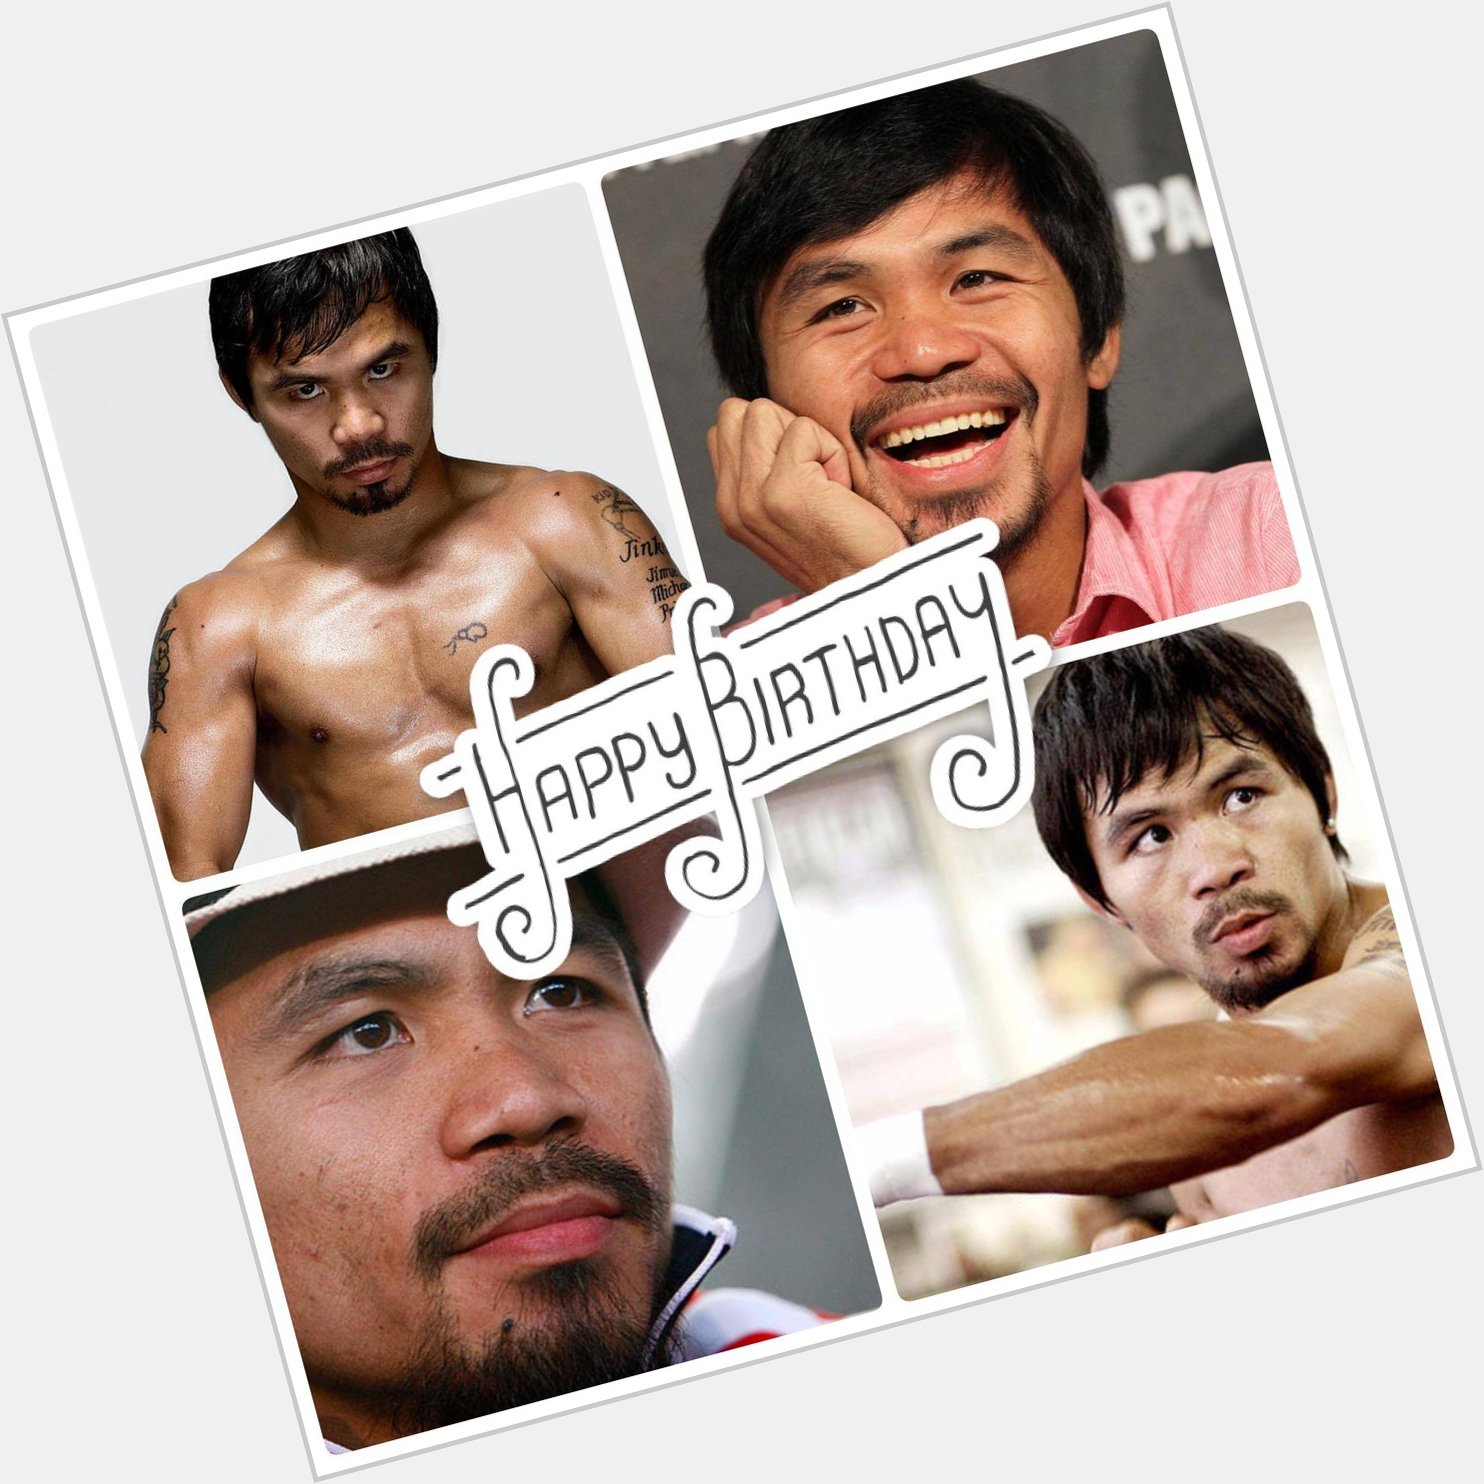 Happy Birthday to Manny Pacquiao!! Help us celebrate this awesome athlete & humble man:  